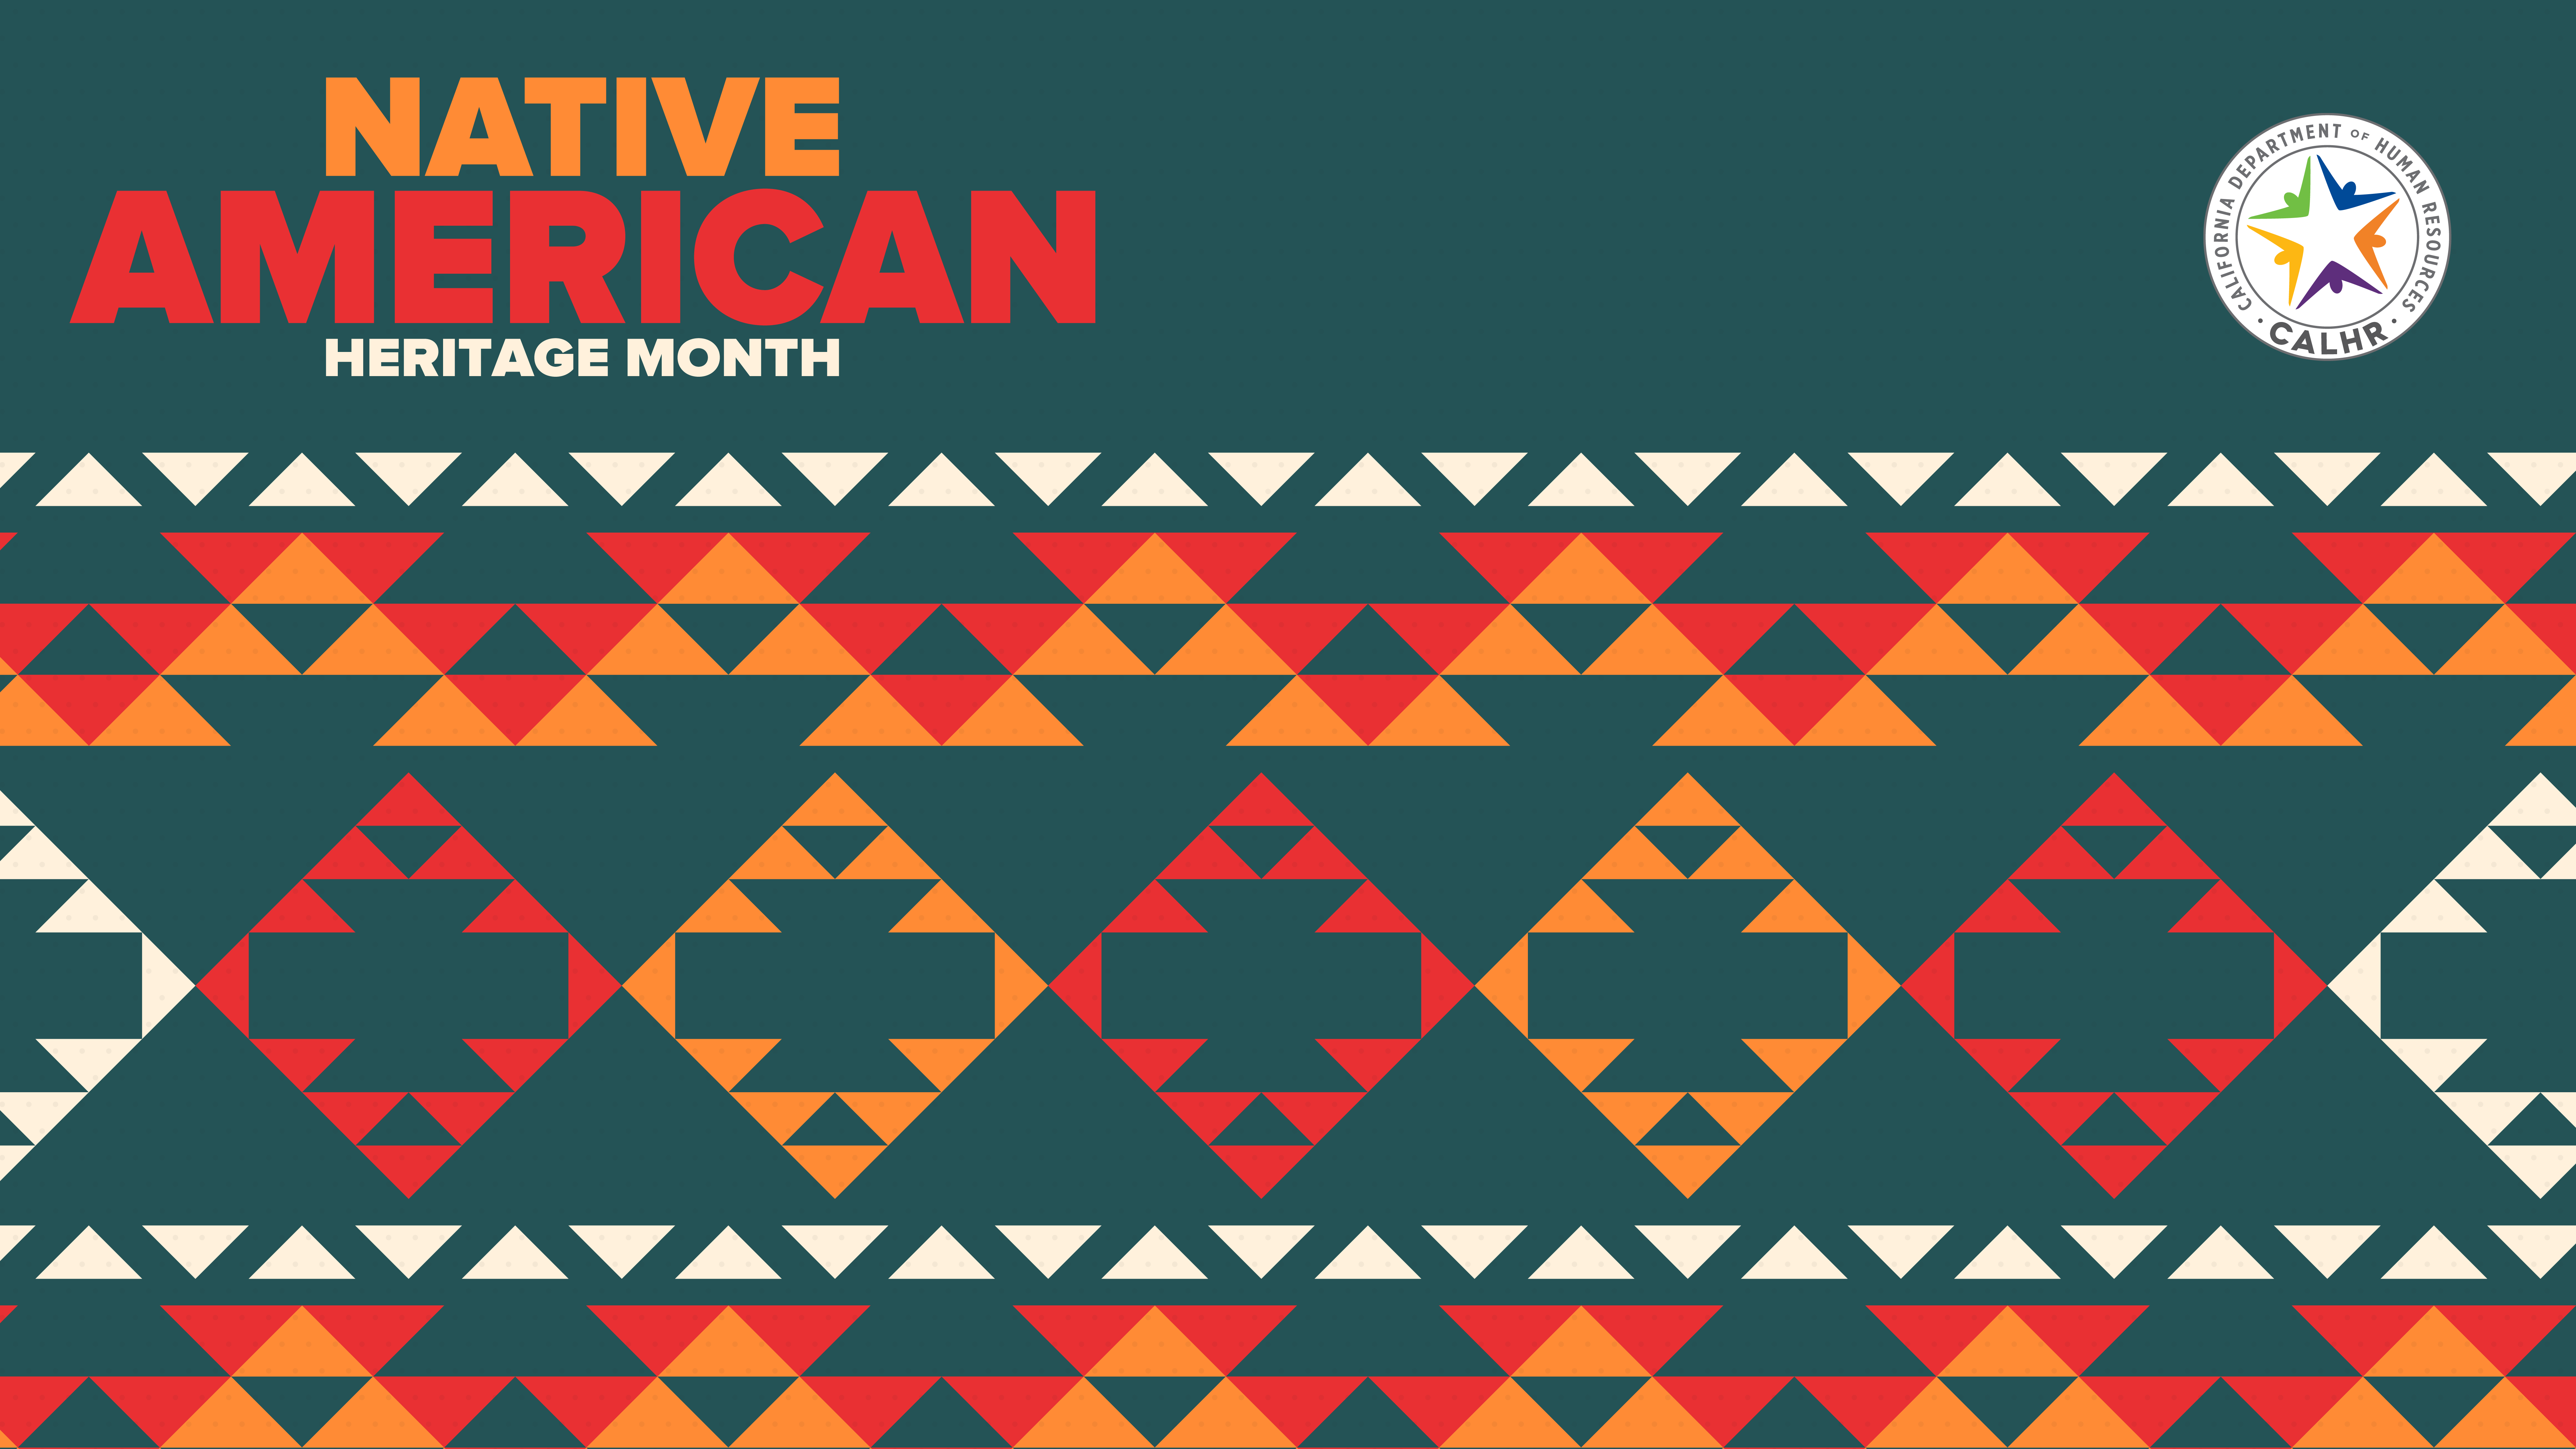 immage - teal background with white, orange, and red diamond shapes Native American Heritage Month virtual background